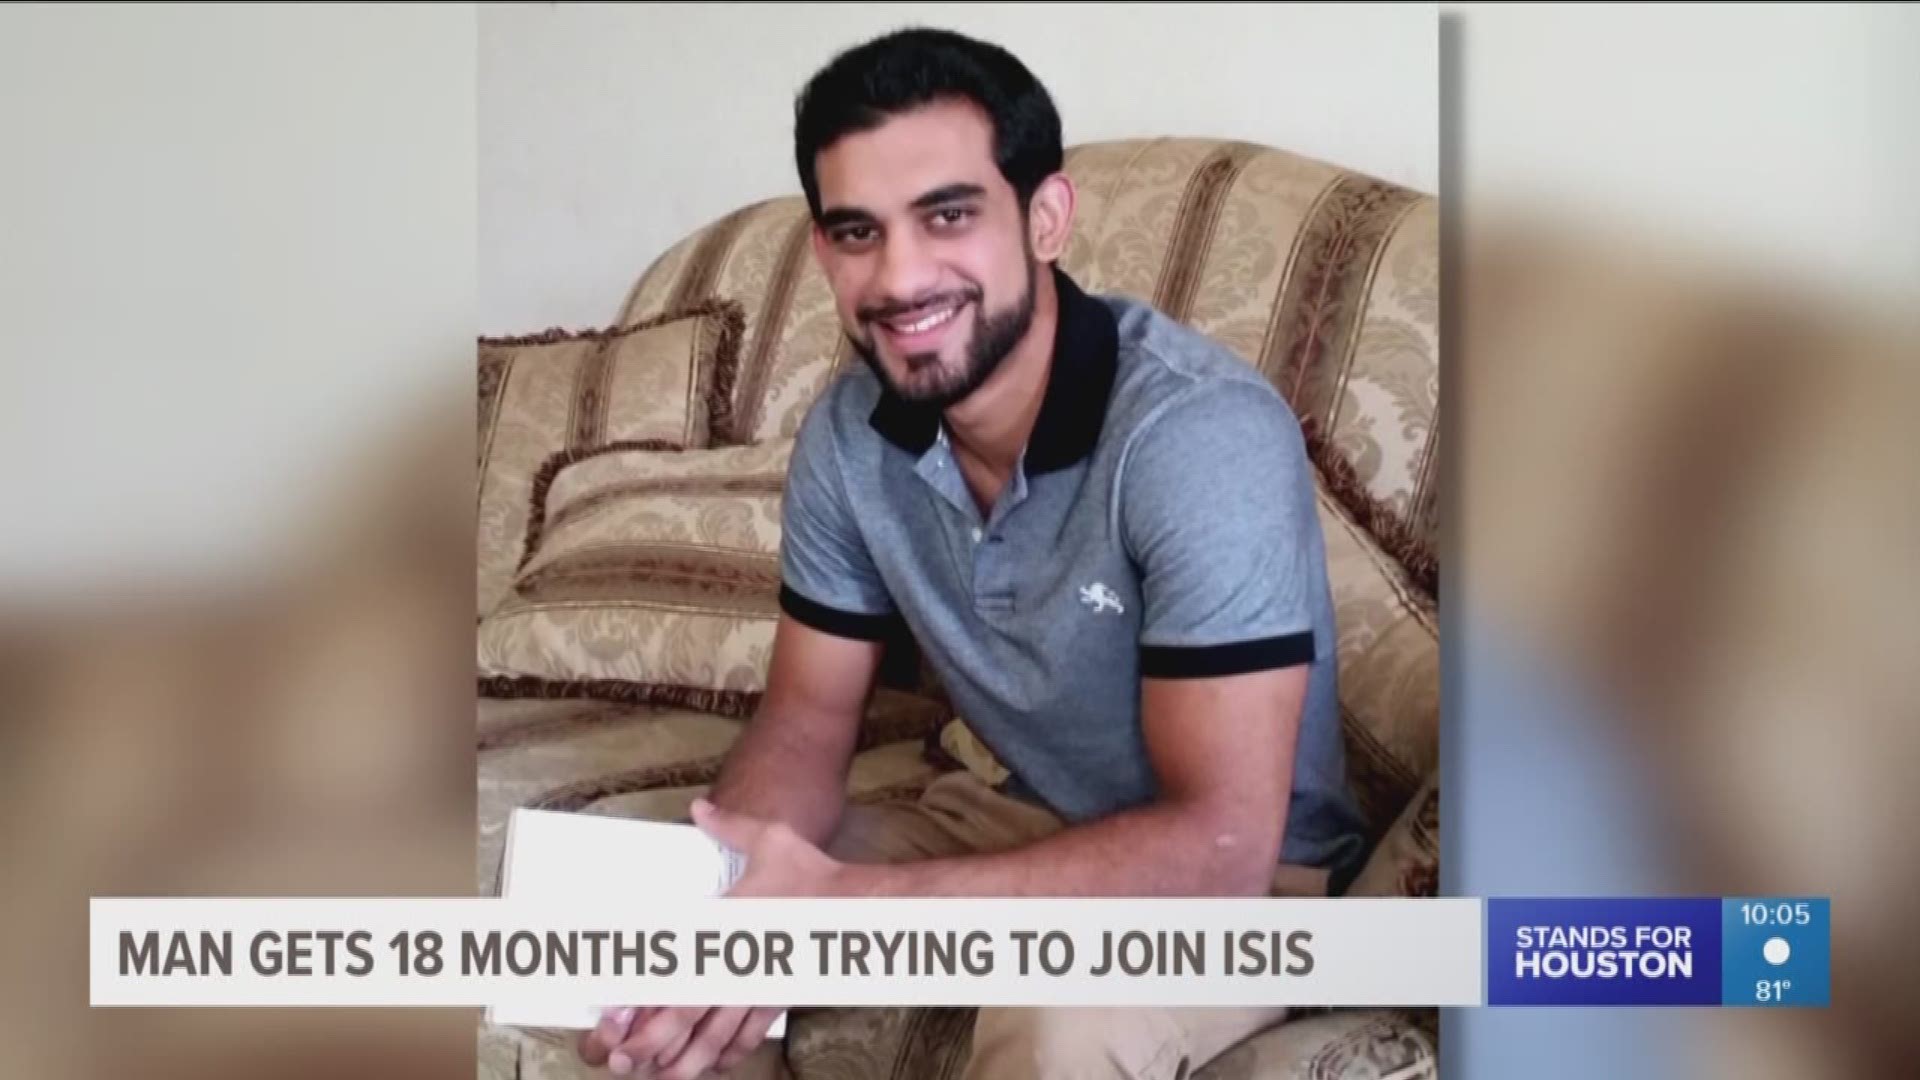 A former University of Houston student will spend the next 18 months in prison after pleading guilty to trying to join ISIS.